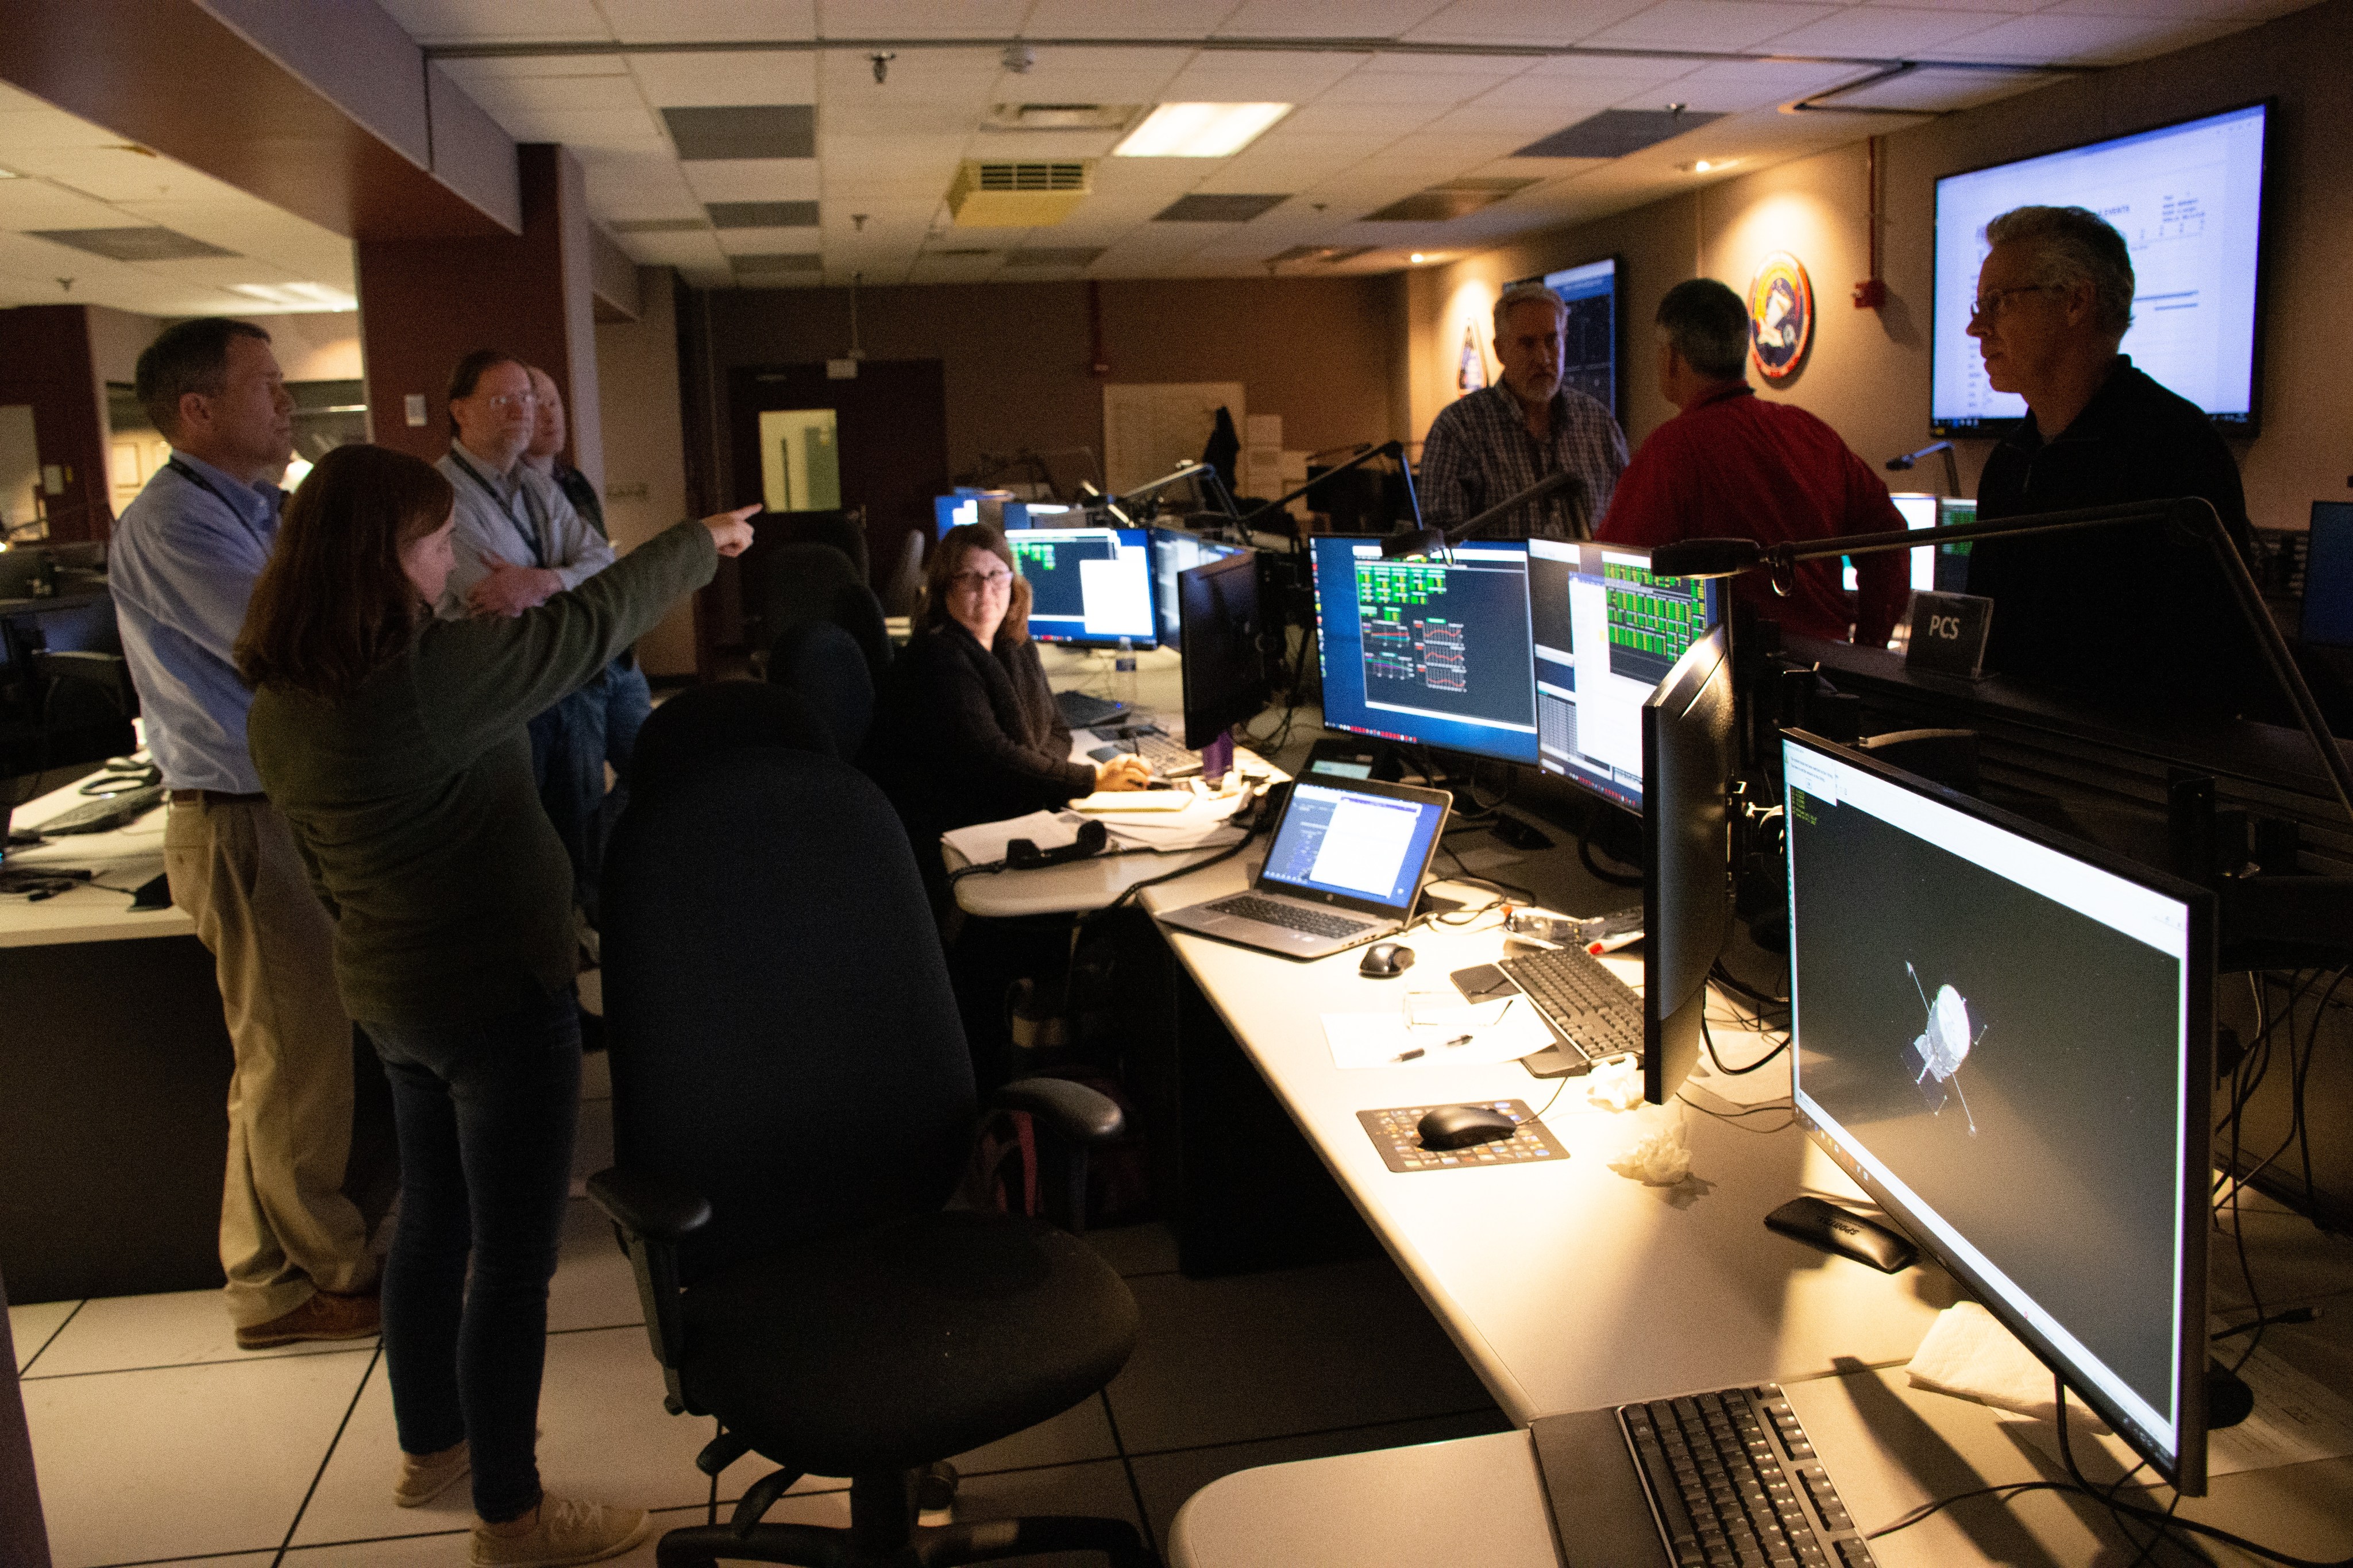 Eight people look at the data on a large screen in the Hubble operations area and discuss a test that is being conducted.